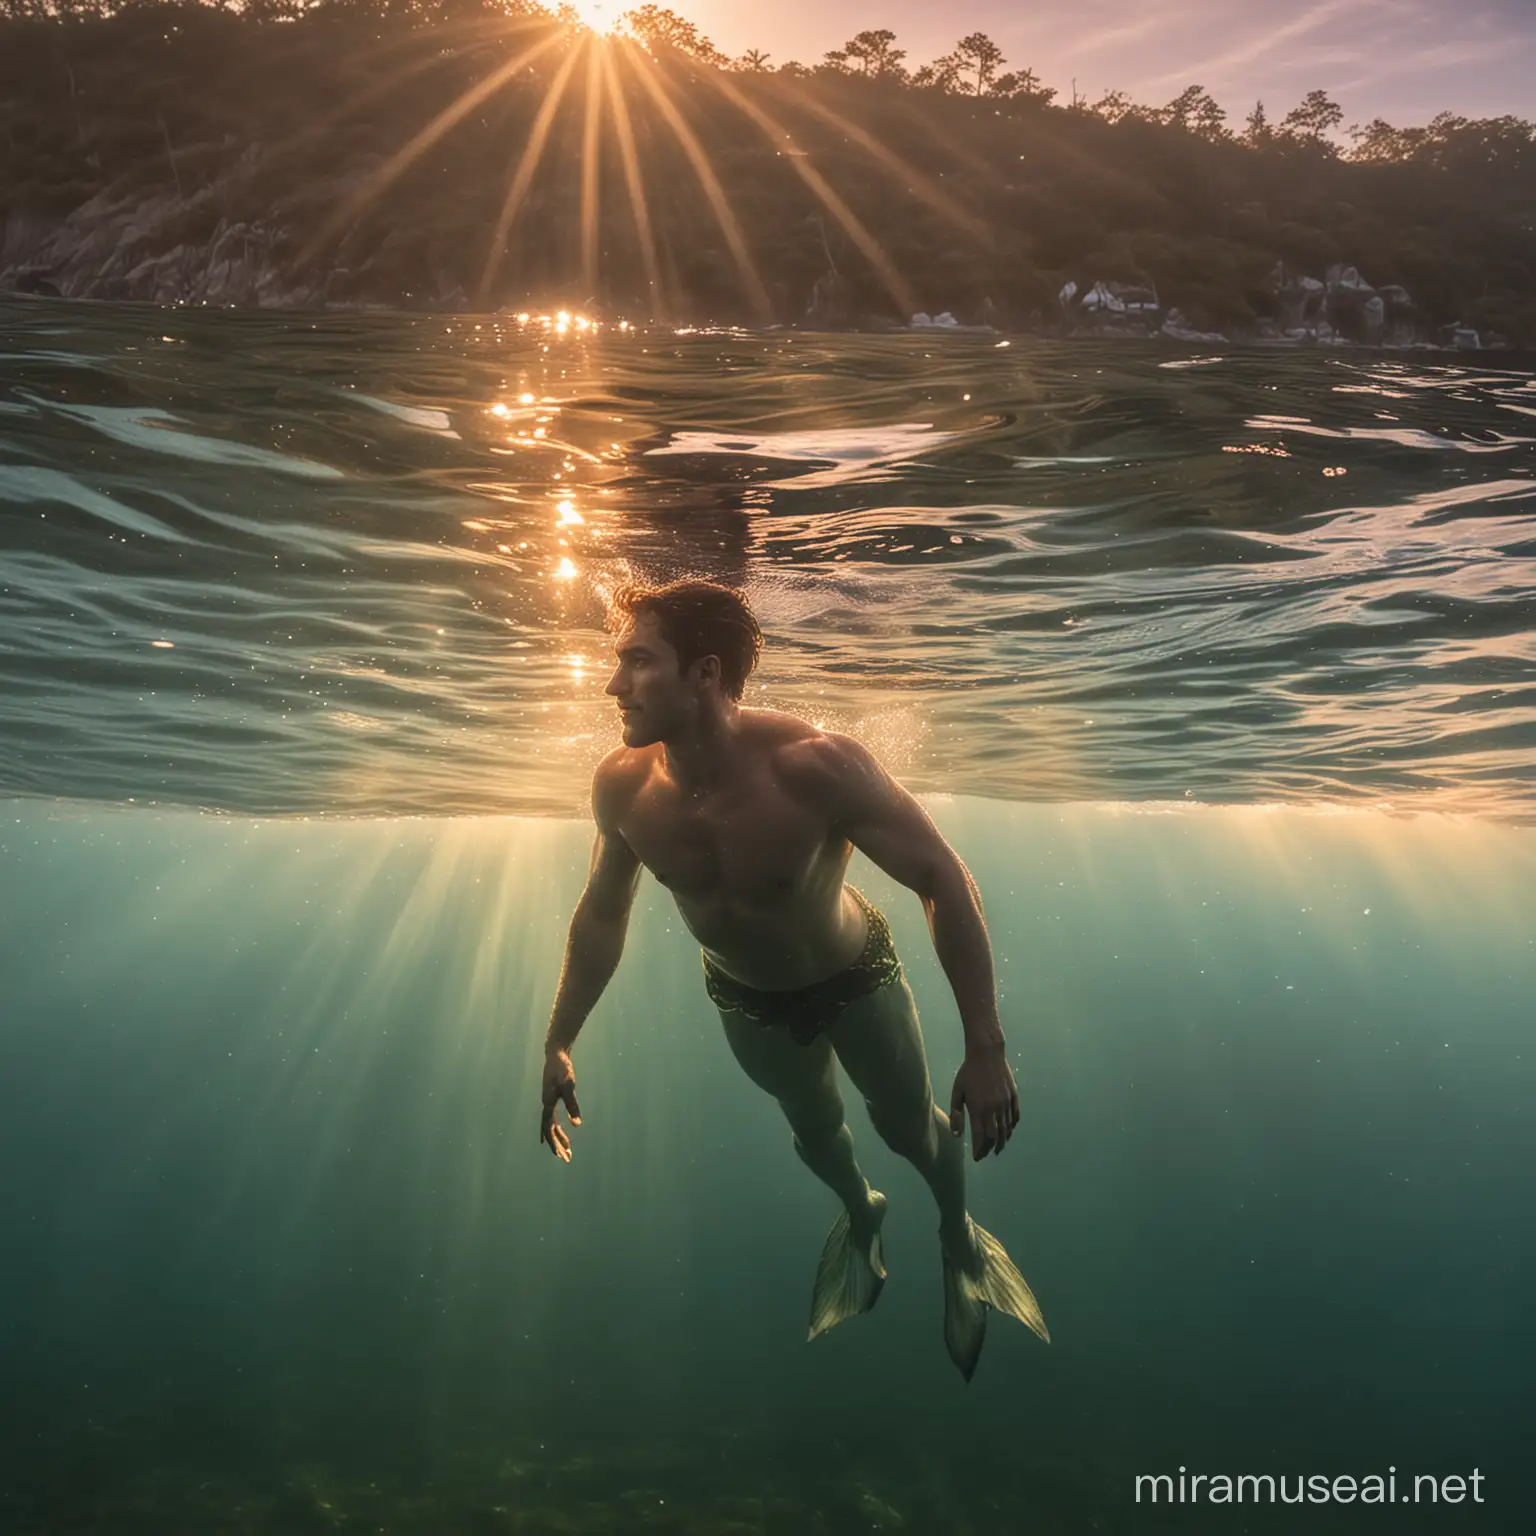 Merman swimming right below the surface of the water coming towards me with a ba kground of a setting sunset on the water 